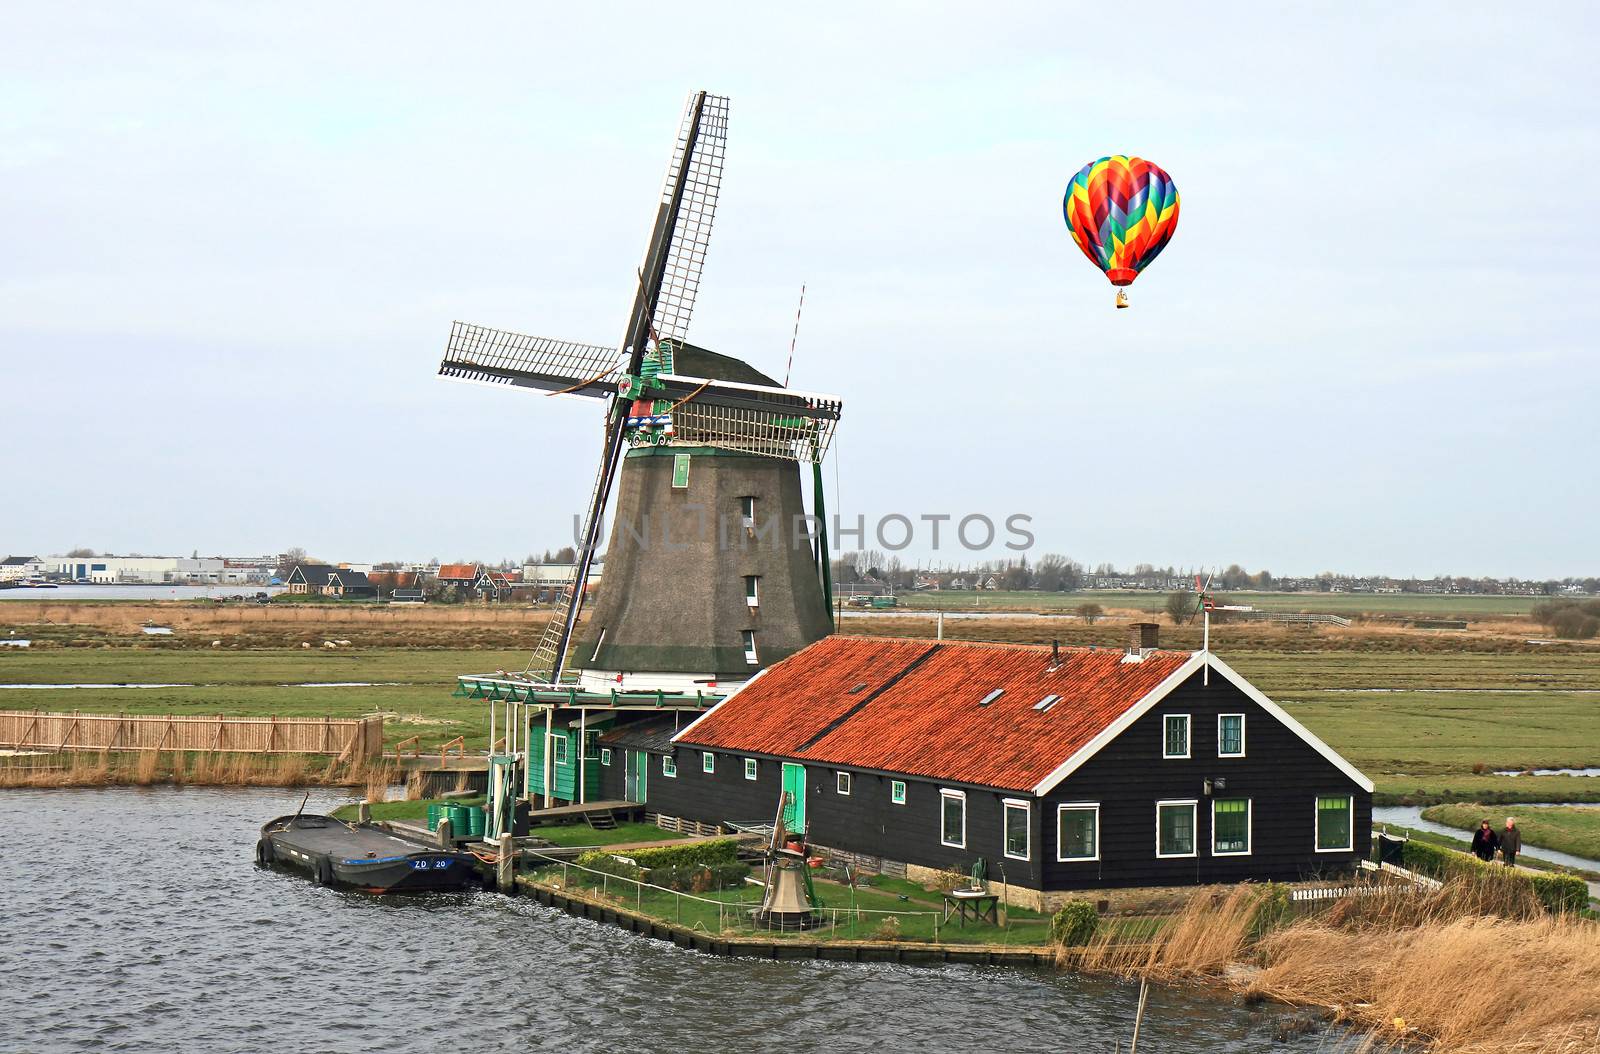 The historical windmill in the Dutch countryside